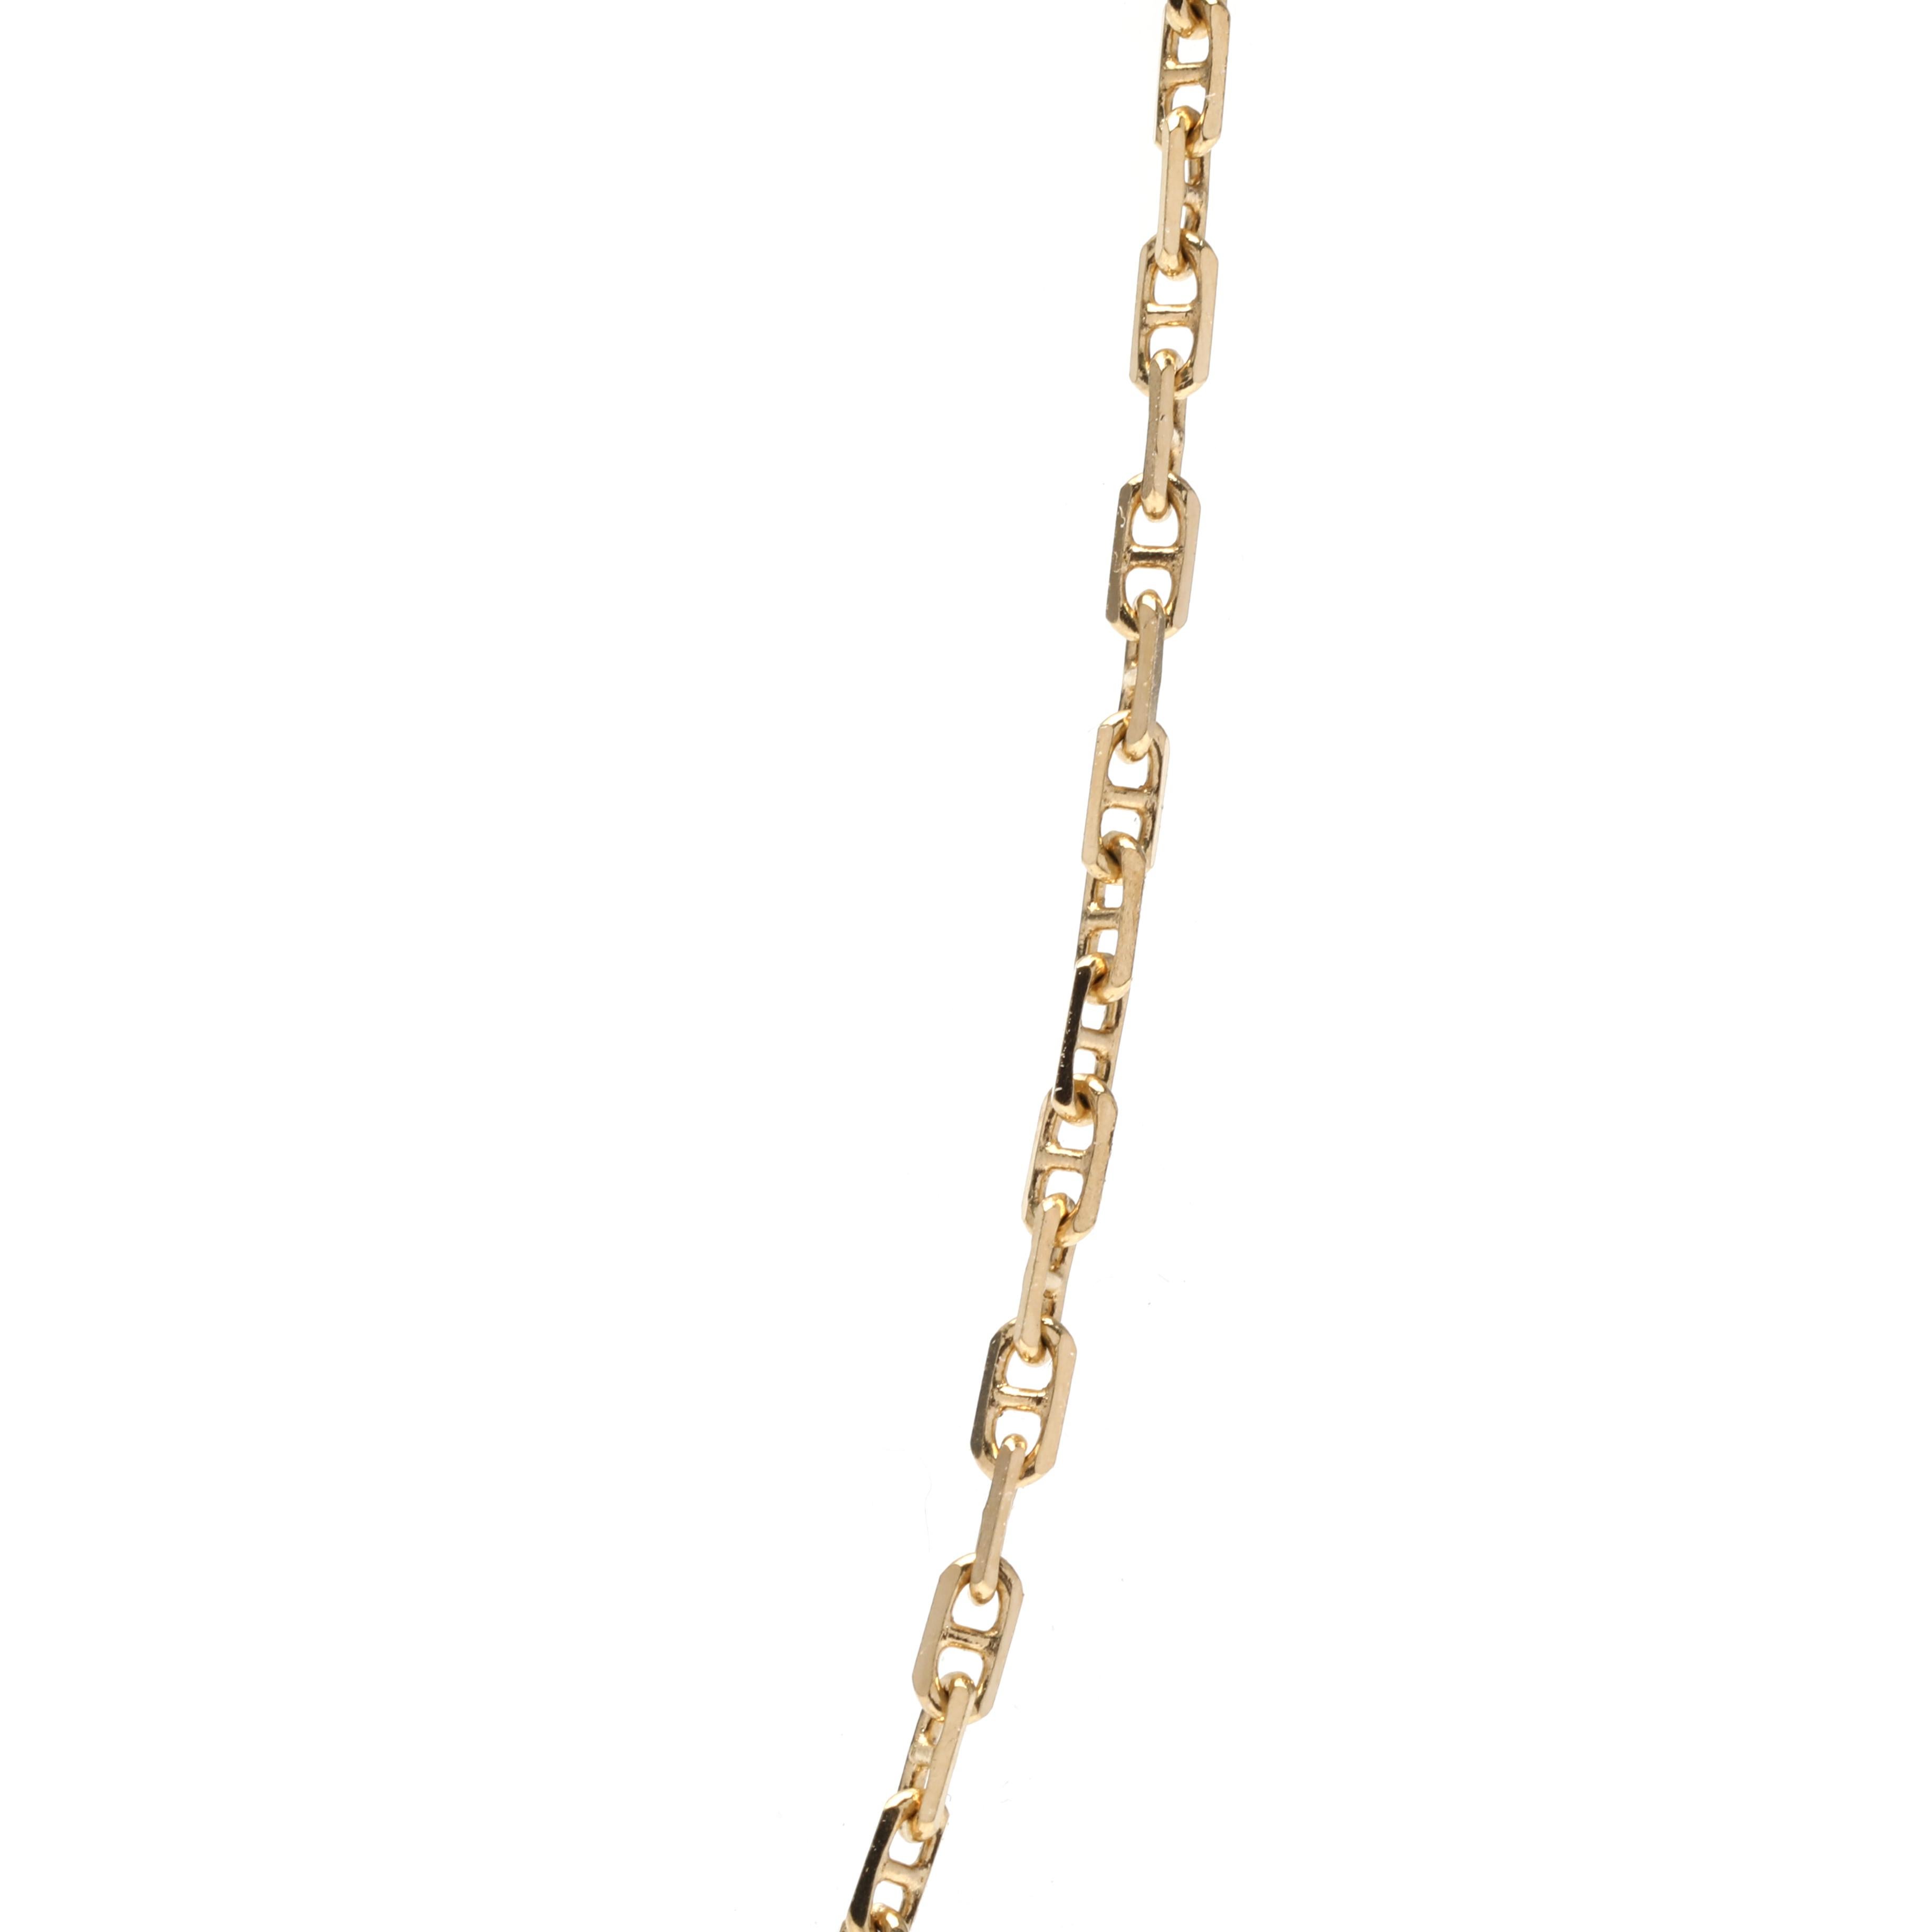 This beautiful Italian thin anchor chain is perfect for everyday wear. Crafted in 14K yellow gold, this chain measures 24 inches in length and features mini anchor links for a stunning look. This long pendant chain is perfect for layering with other